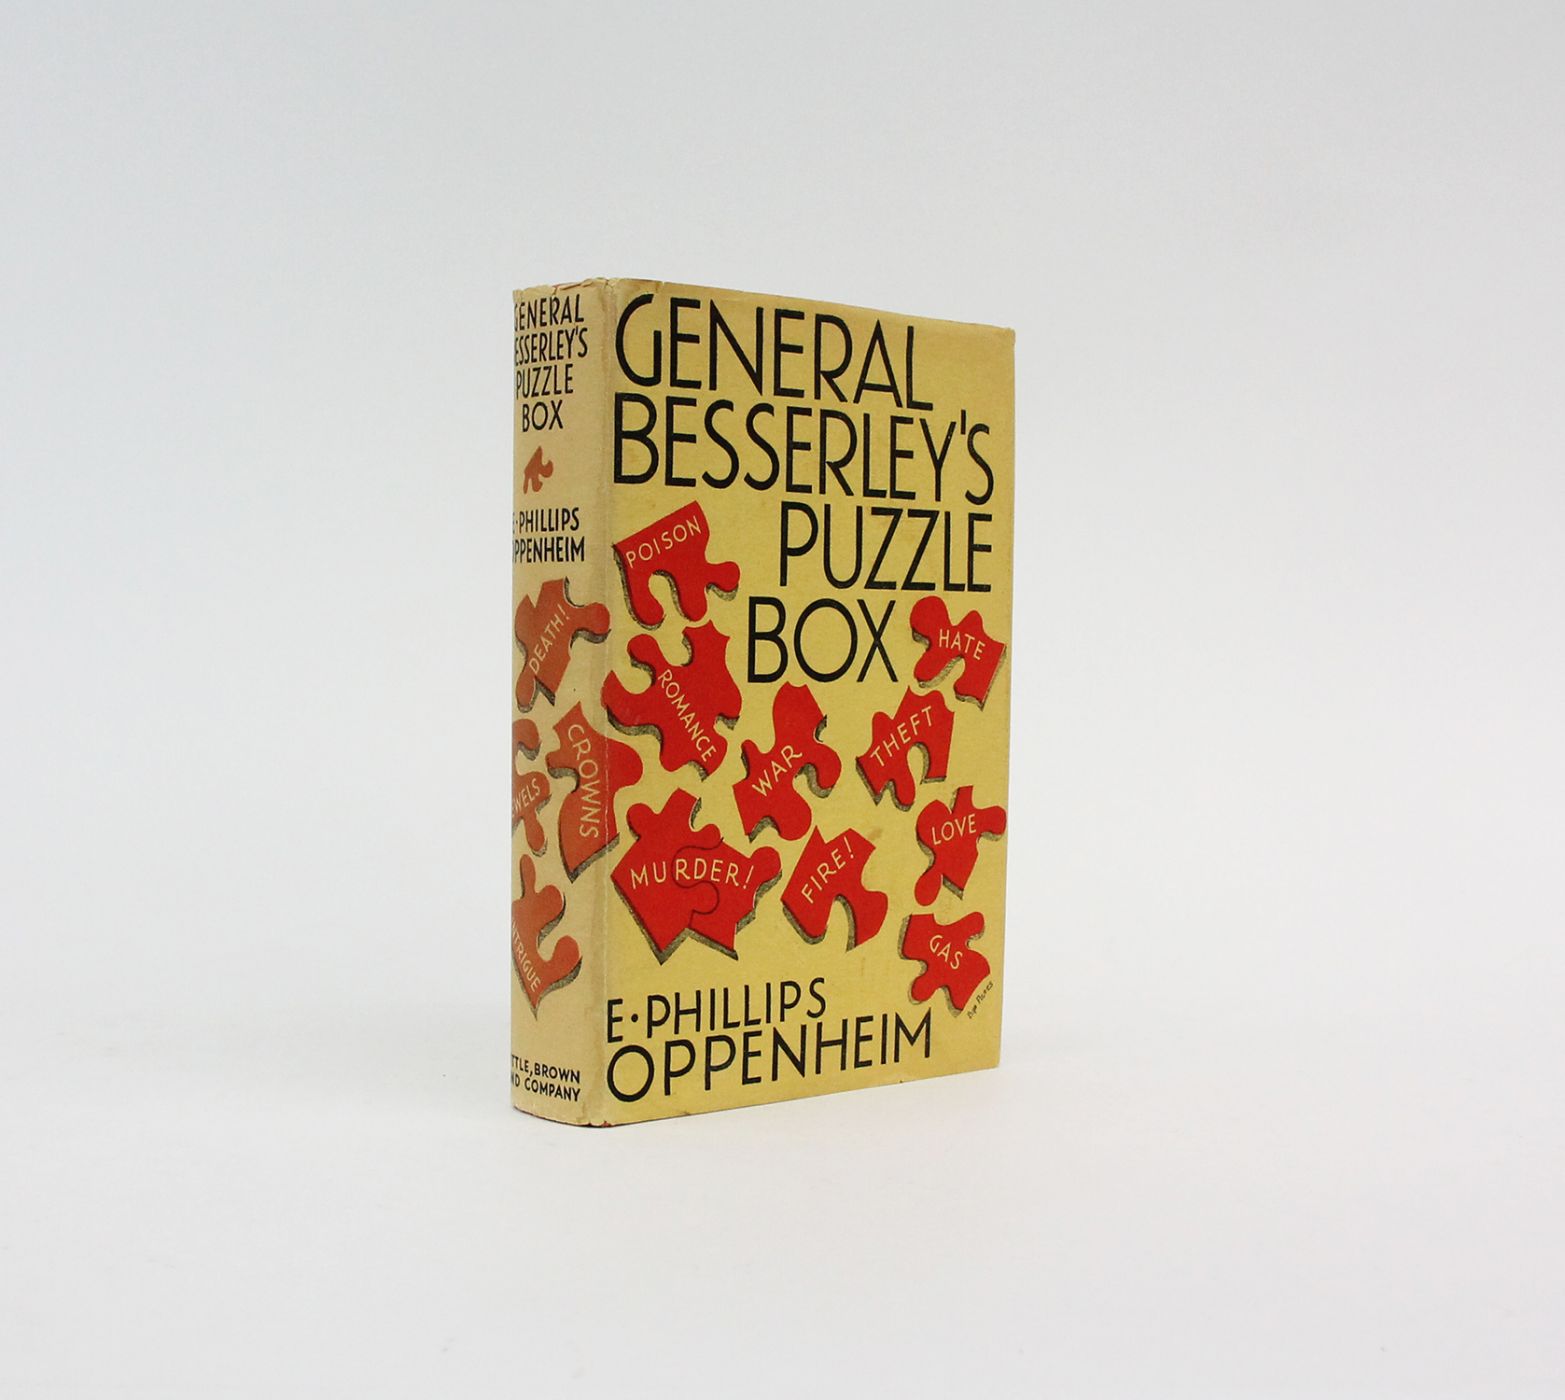 GENERAL BESSERLEY'S PUZZLE BOX -  image 1